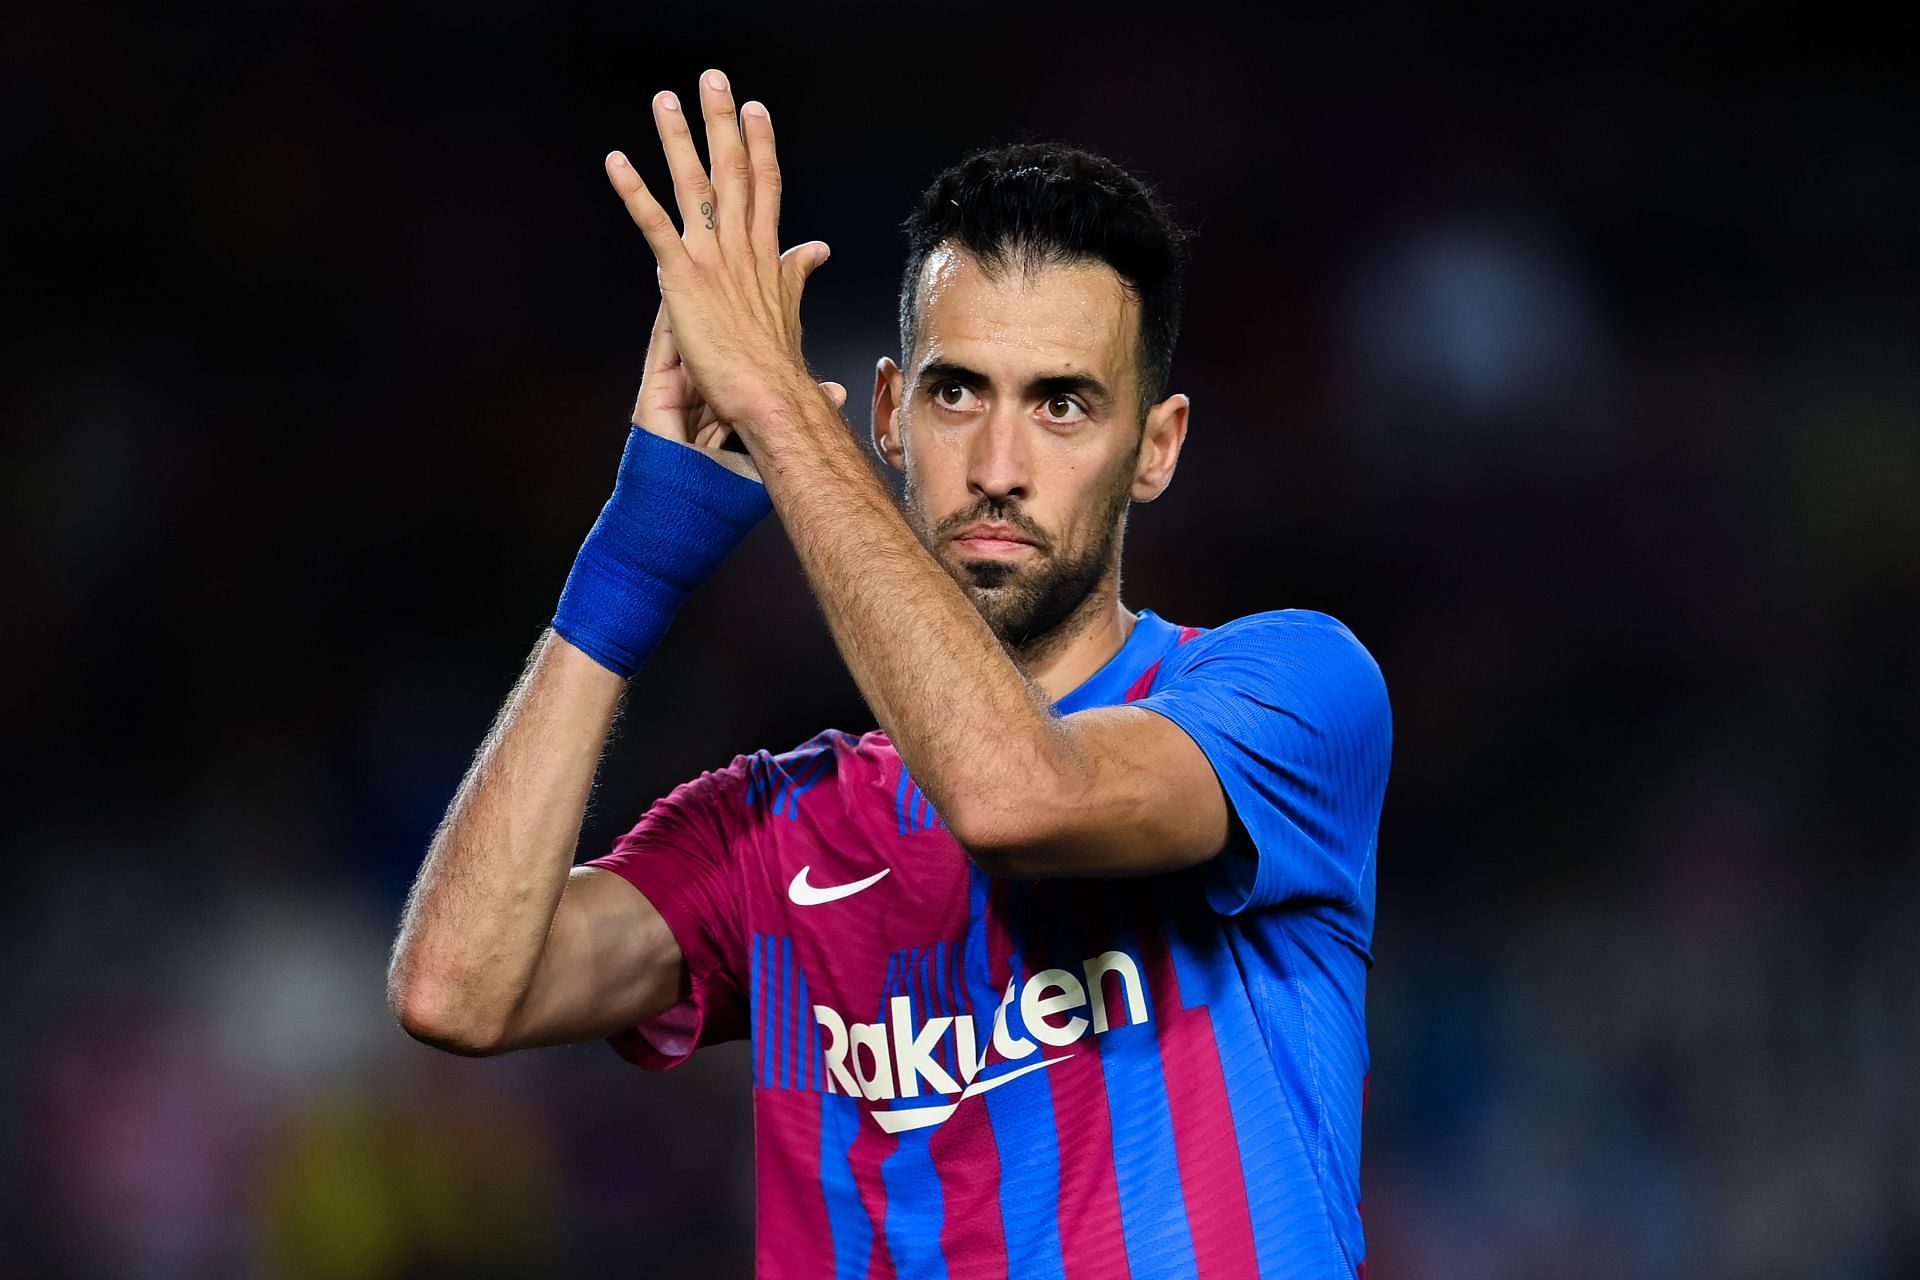 Sergio Busquets continues to play a key role at Barcelona.